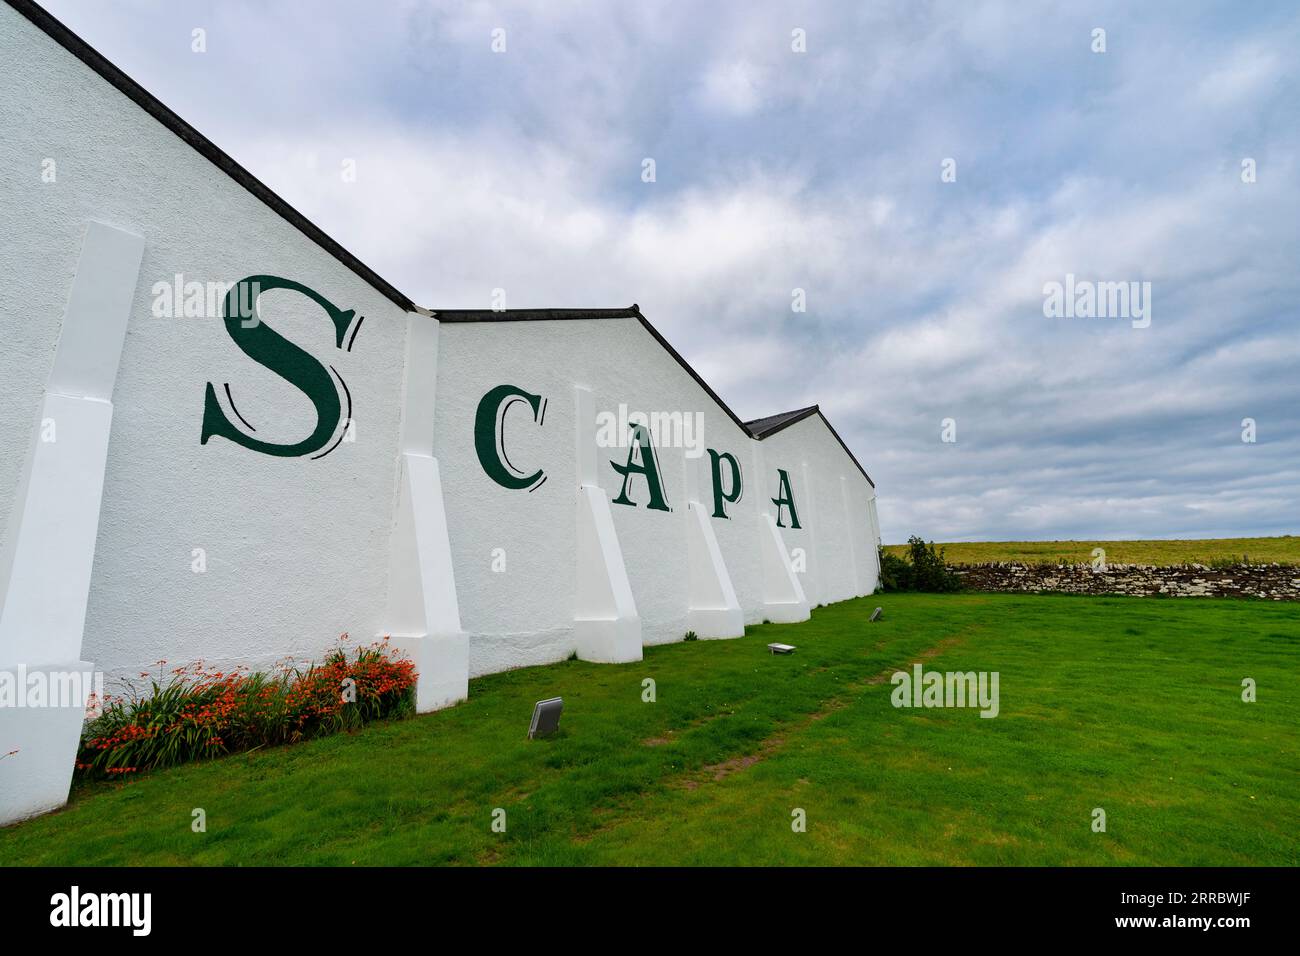 Scapa whisky distillery at Scapa, Mainland, Orkney Islands, Scotland, UK Stock Photo